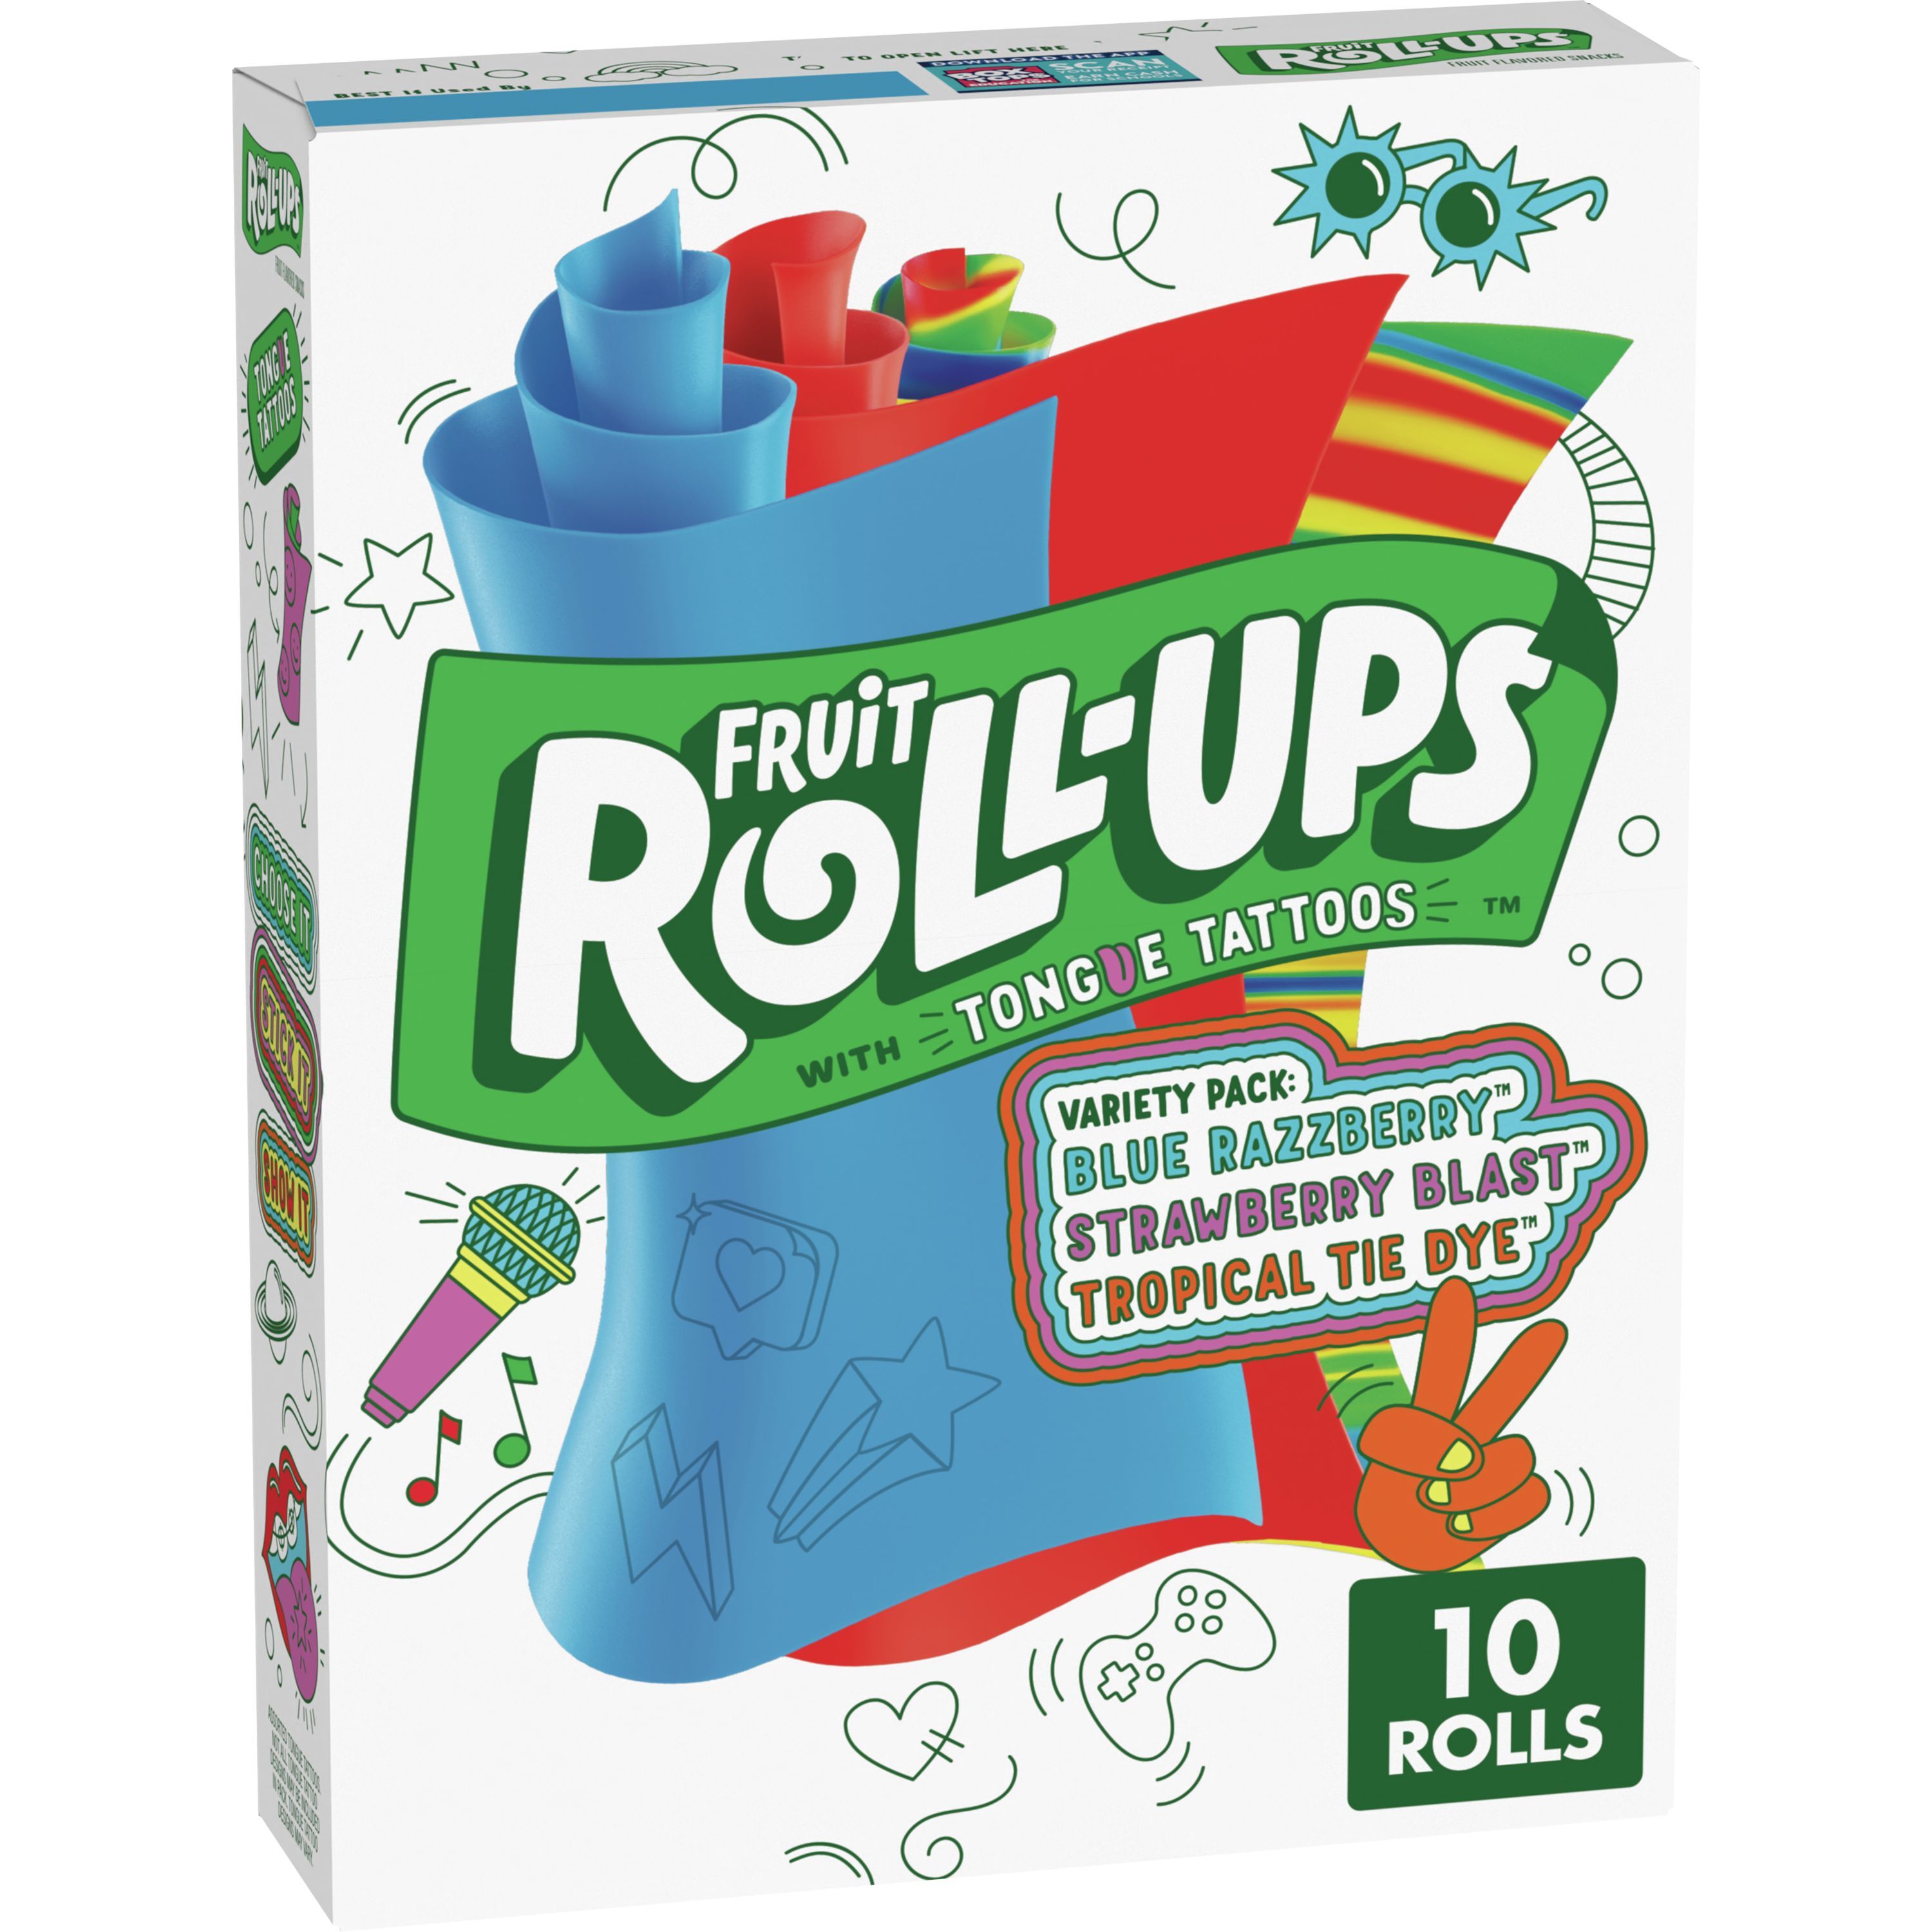 Fruit Roll-Ups Fruit Flavored Snacks, Variety Pack, Pouches, 10 ct - image 1 of 10